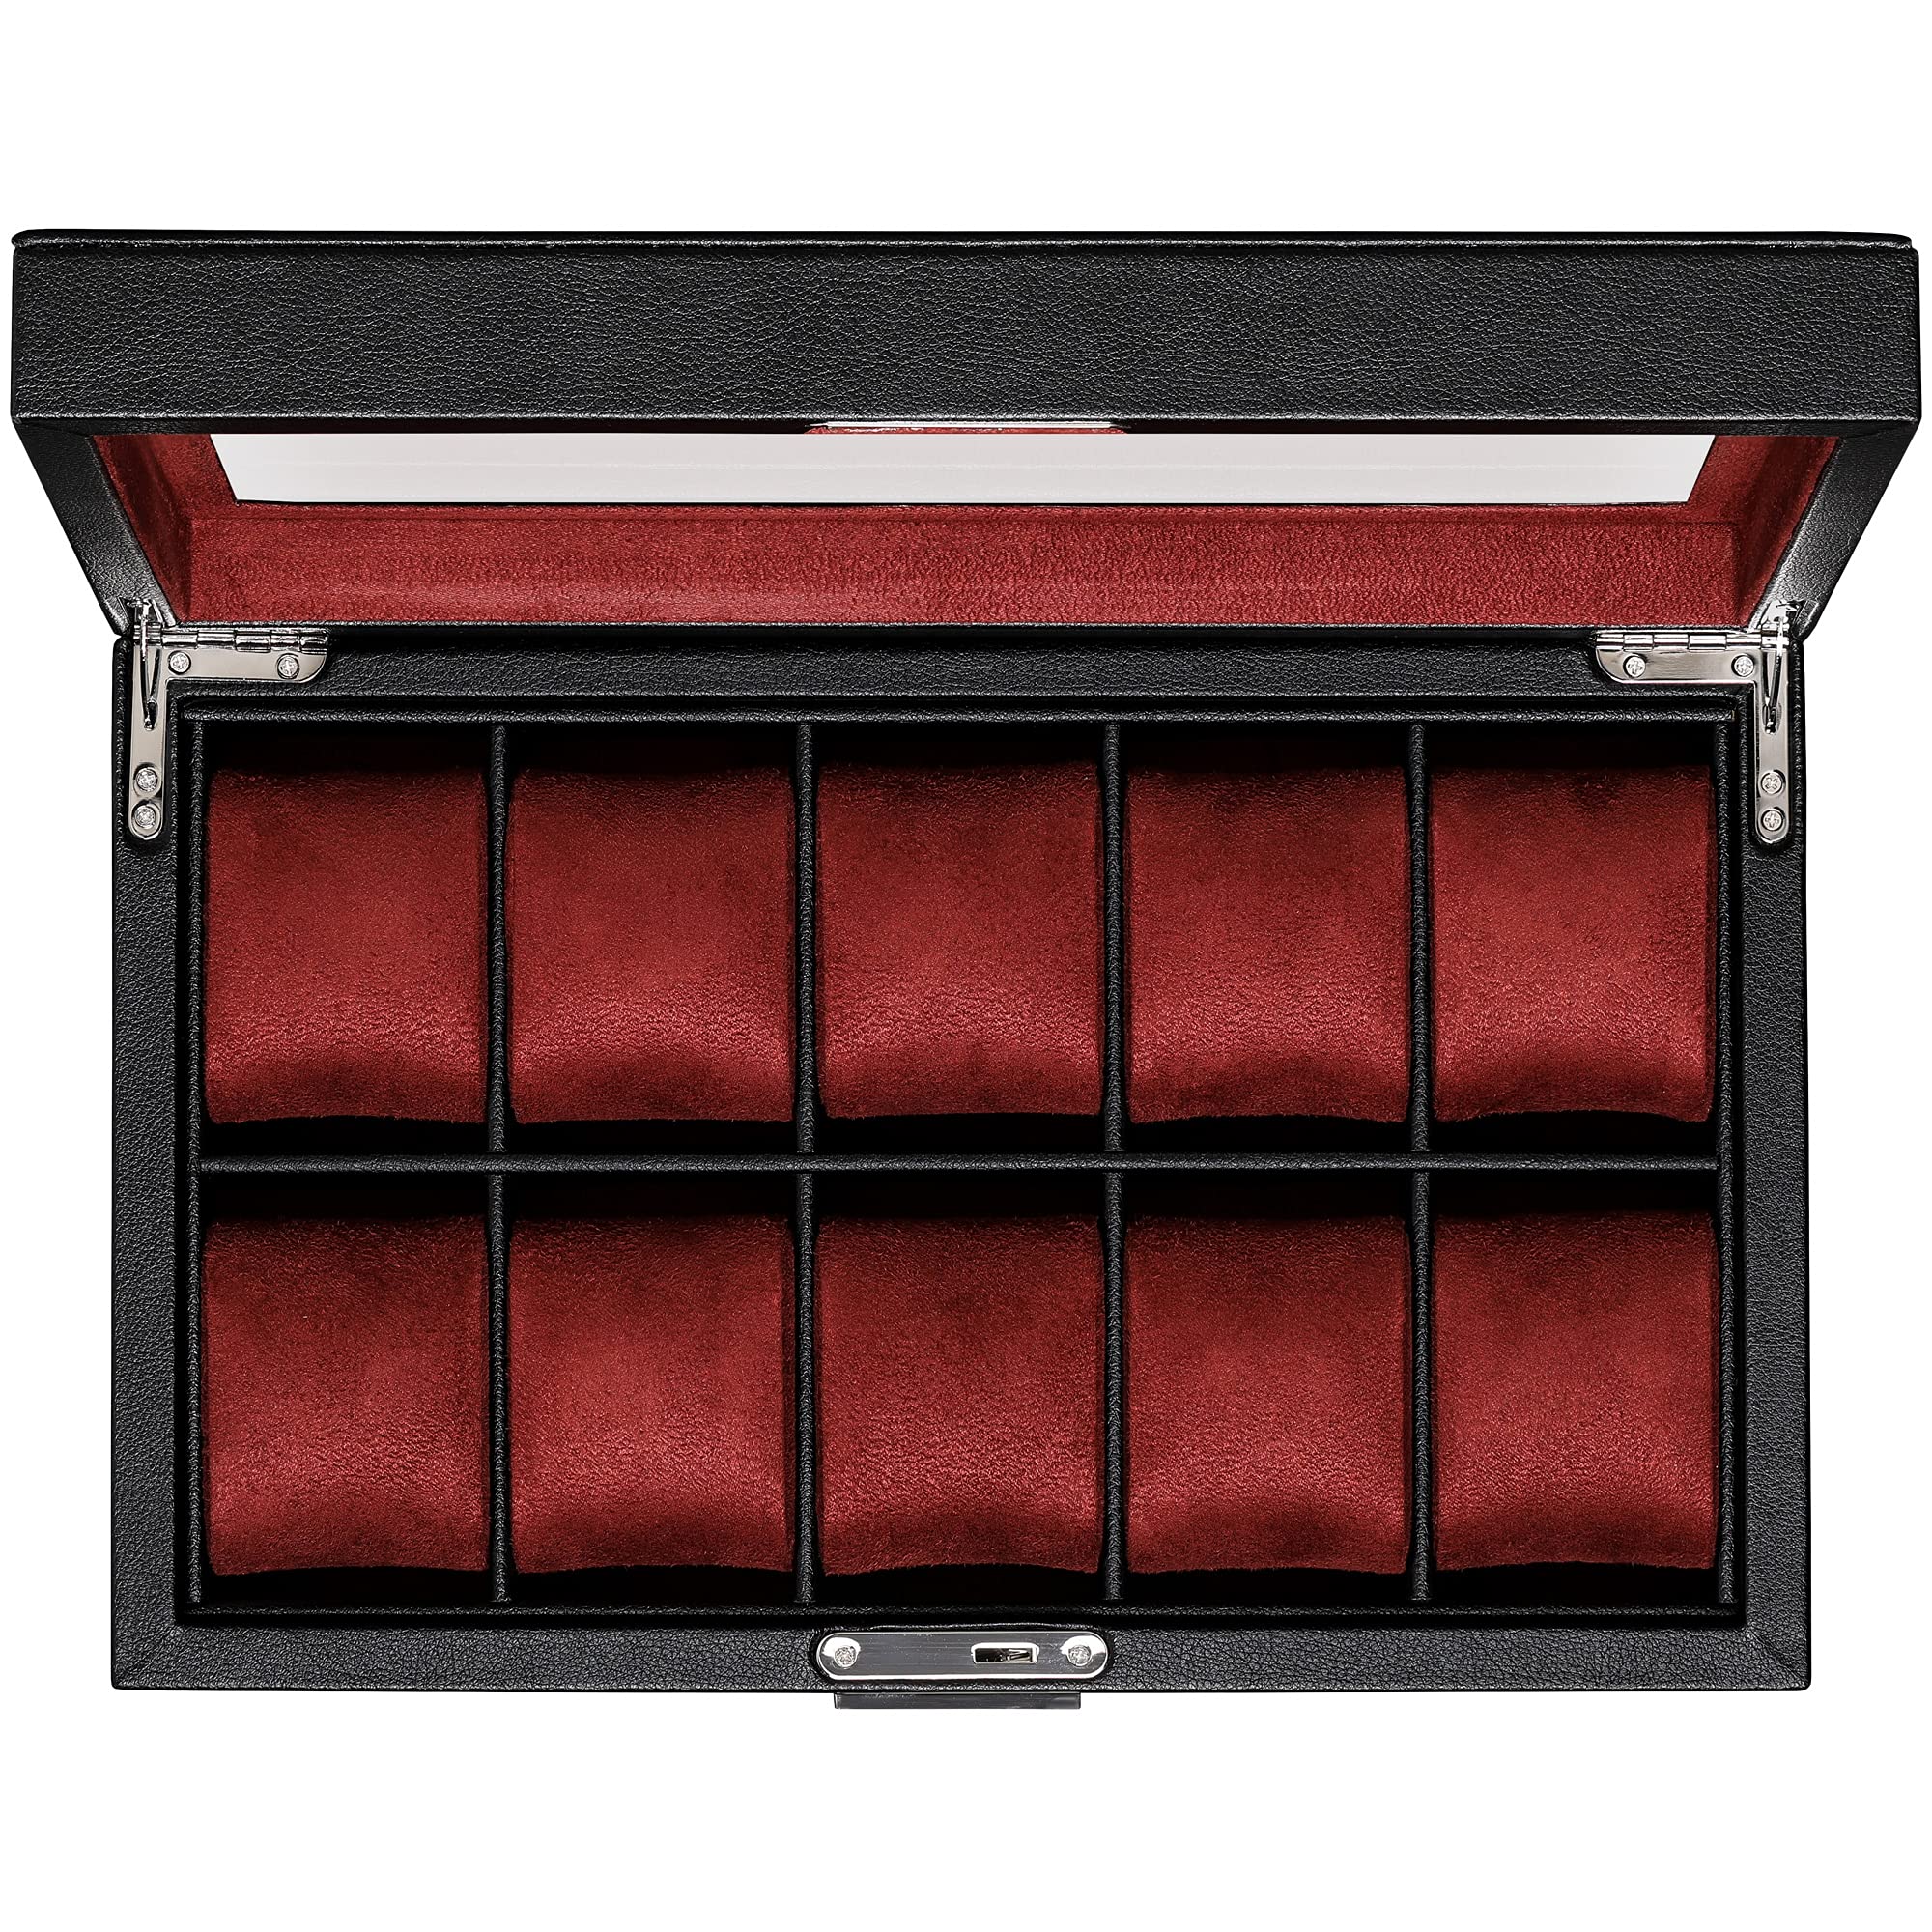 ROTHWELL 10 Slot Leather Watch Box - Luxury Watch Case Display Jewelry Organizer - Locking Watch Display Case Holder with Large Glass Top - Watch Box Organizer for Men and Women (Black/Red)